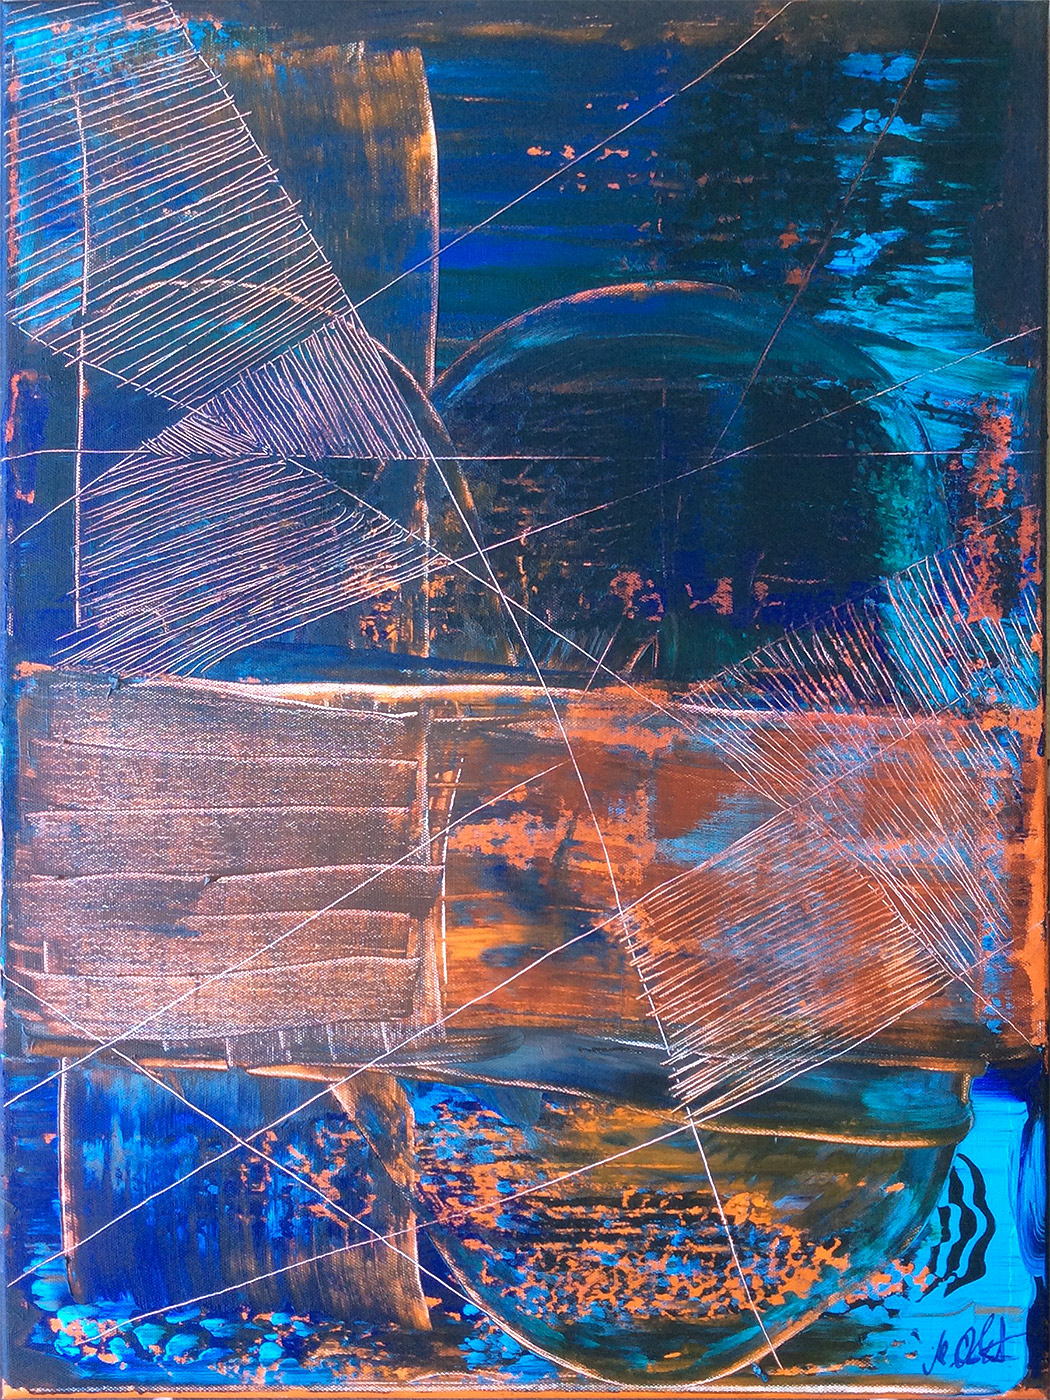 Universal Connections Crossed by Orange 18 x 24 in. / 45,7 x 61 cm Acrylics on canvas Martin Lukas Ostachowski